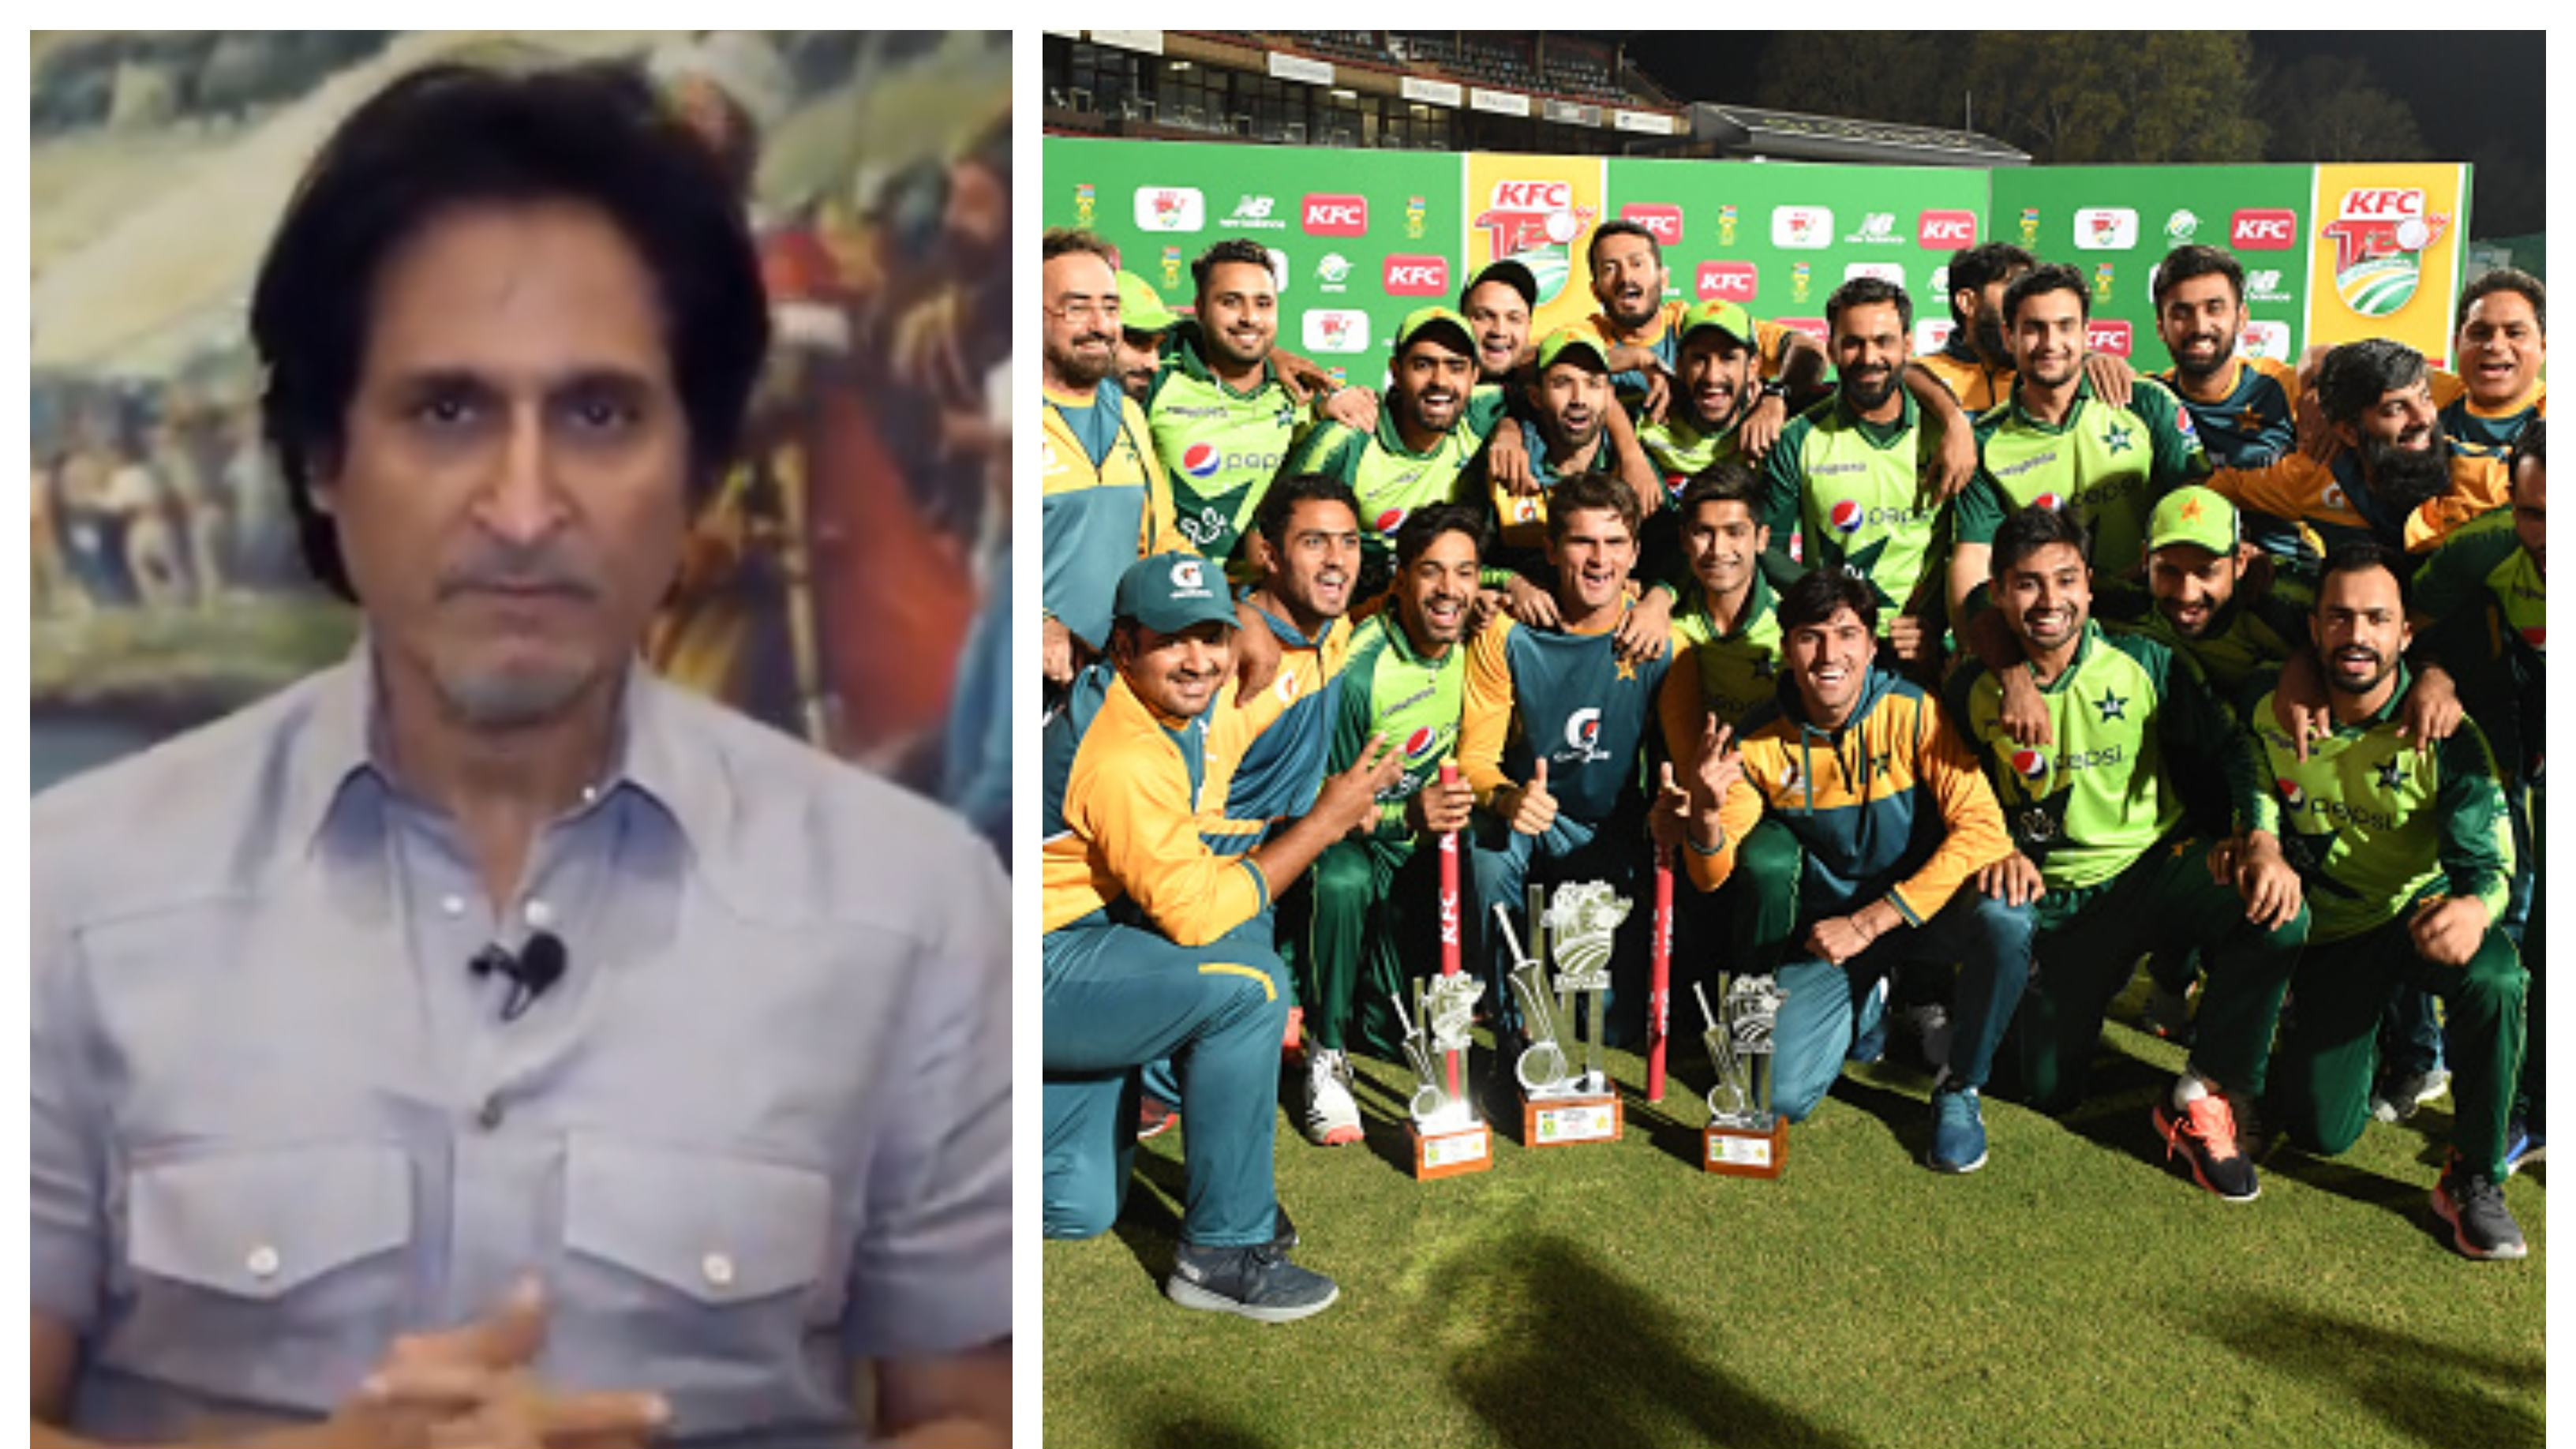 WATCH: Ramiz Raja advises Pakistan players to channelise their anger in becoming a world-class team